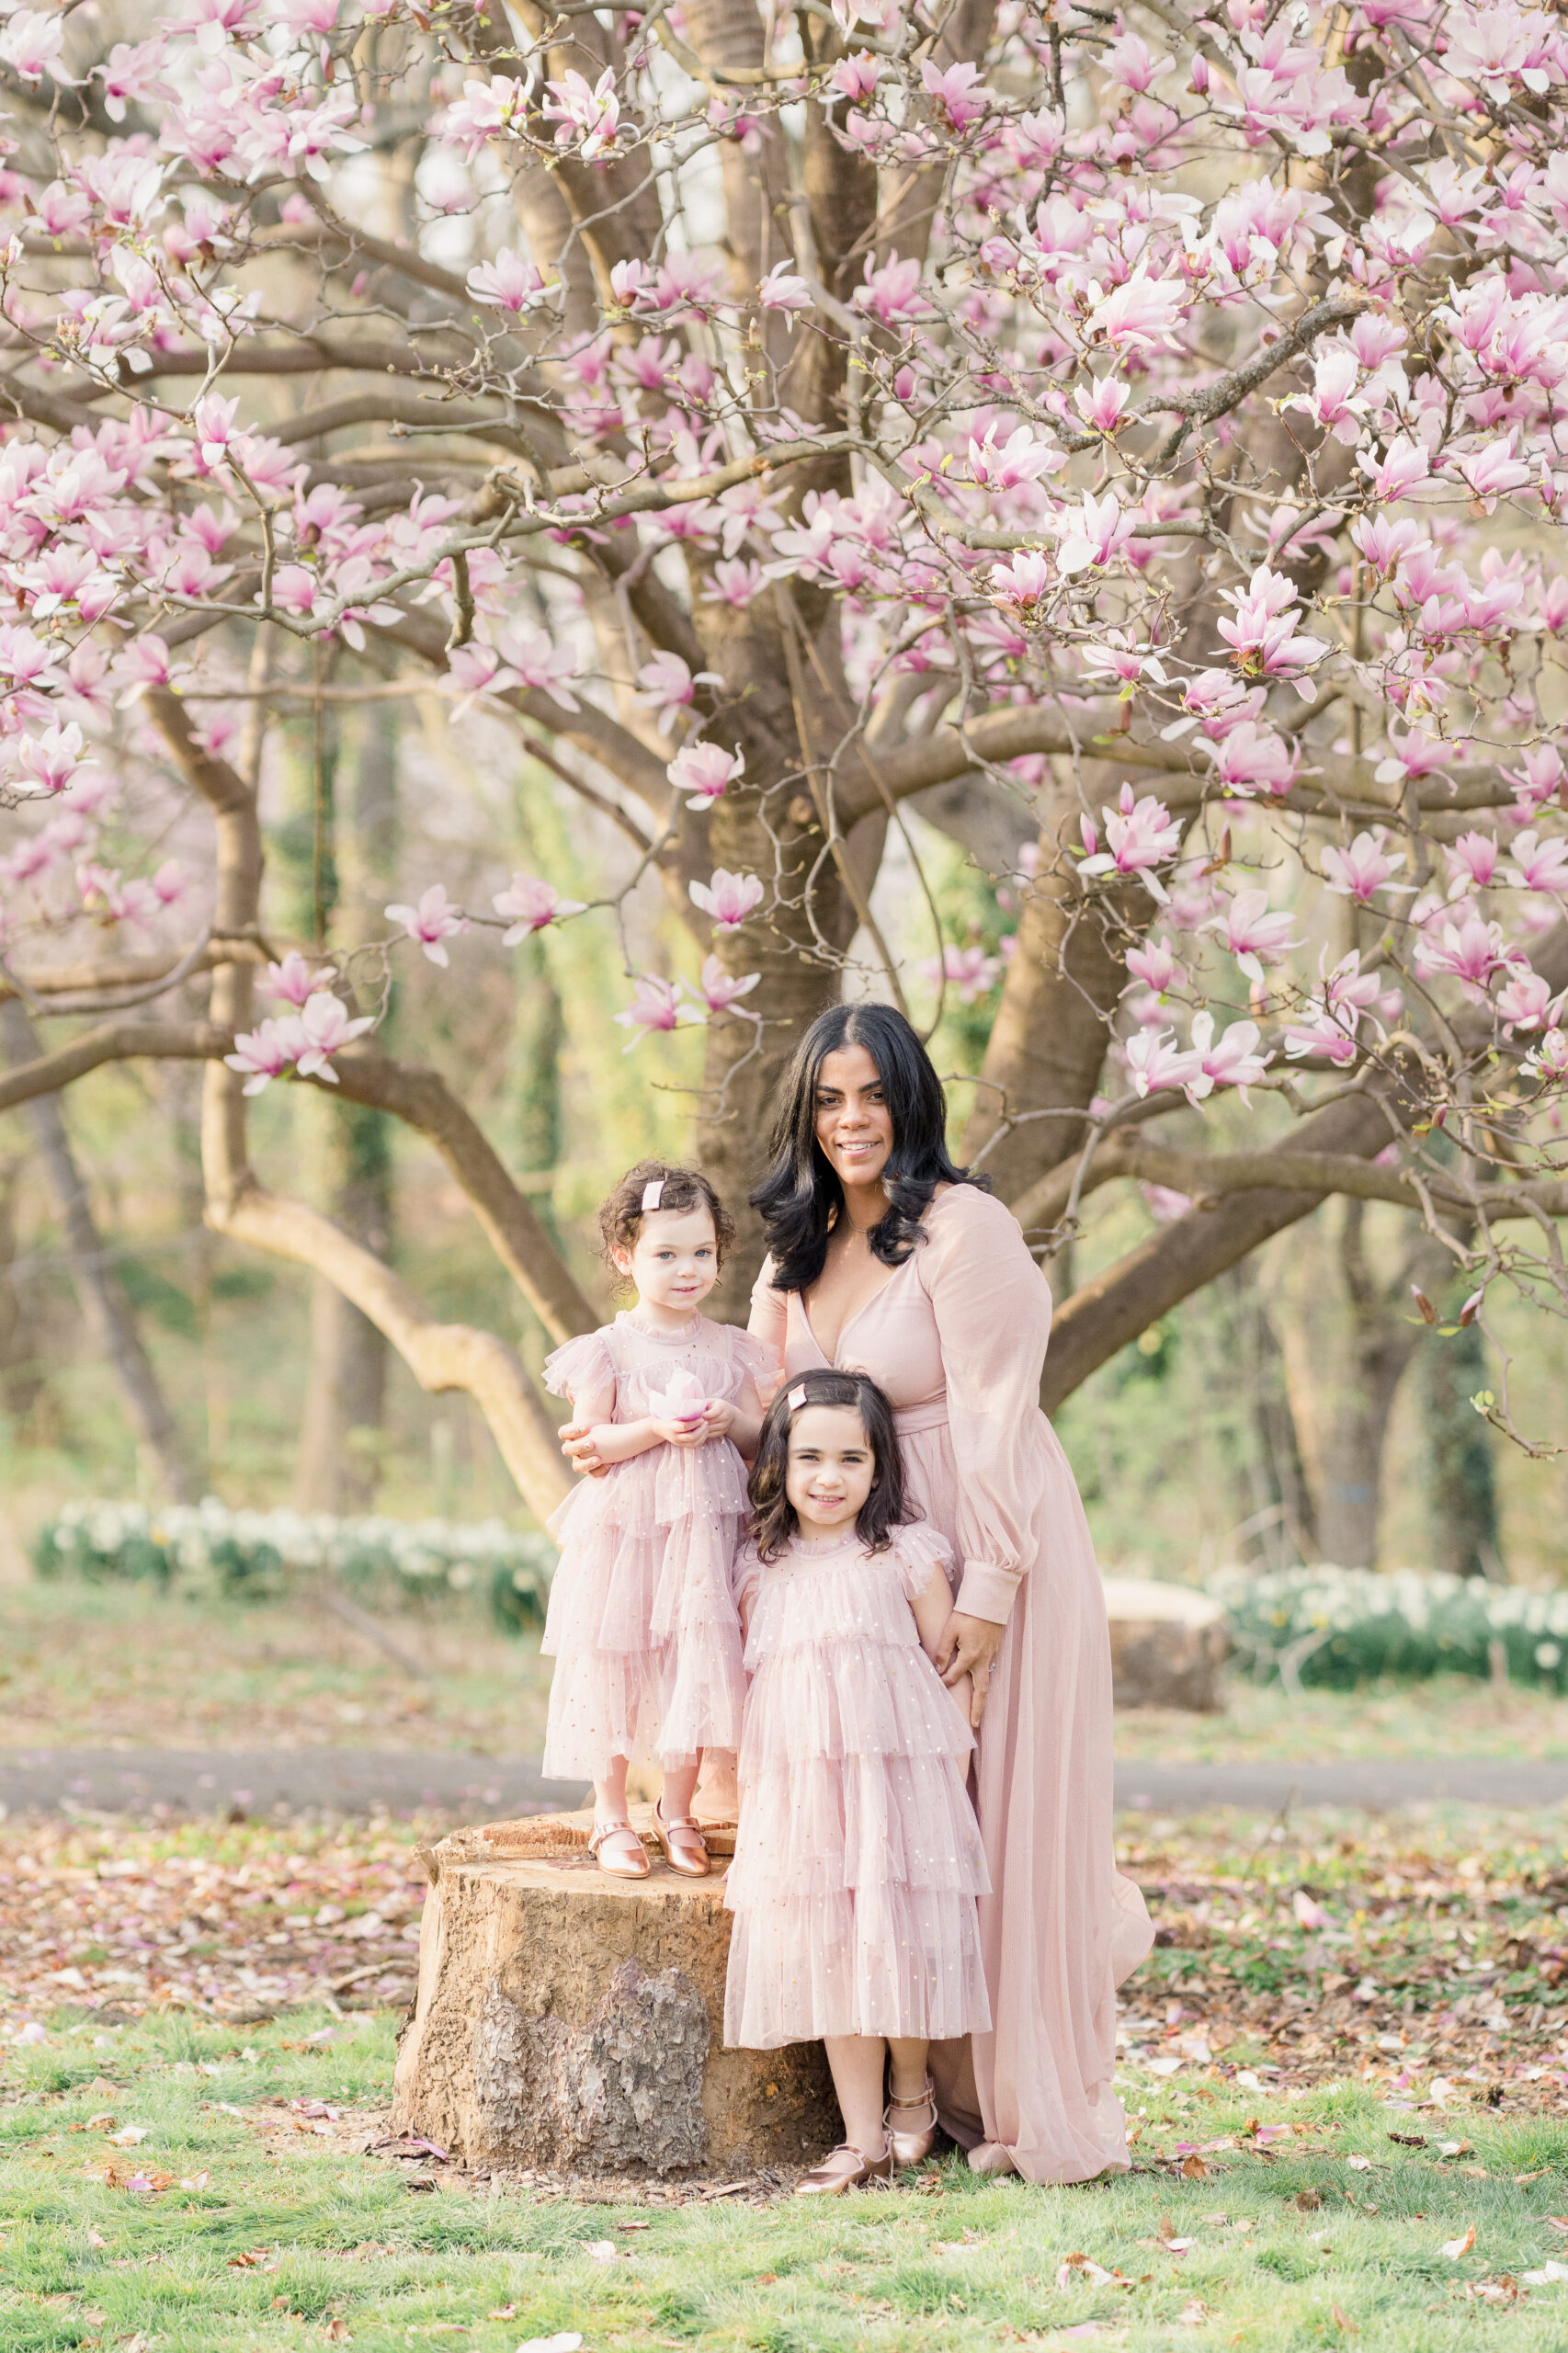 Mother daughter photoshoot with magnolia blossoms.